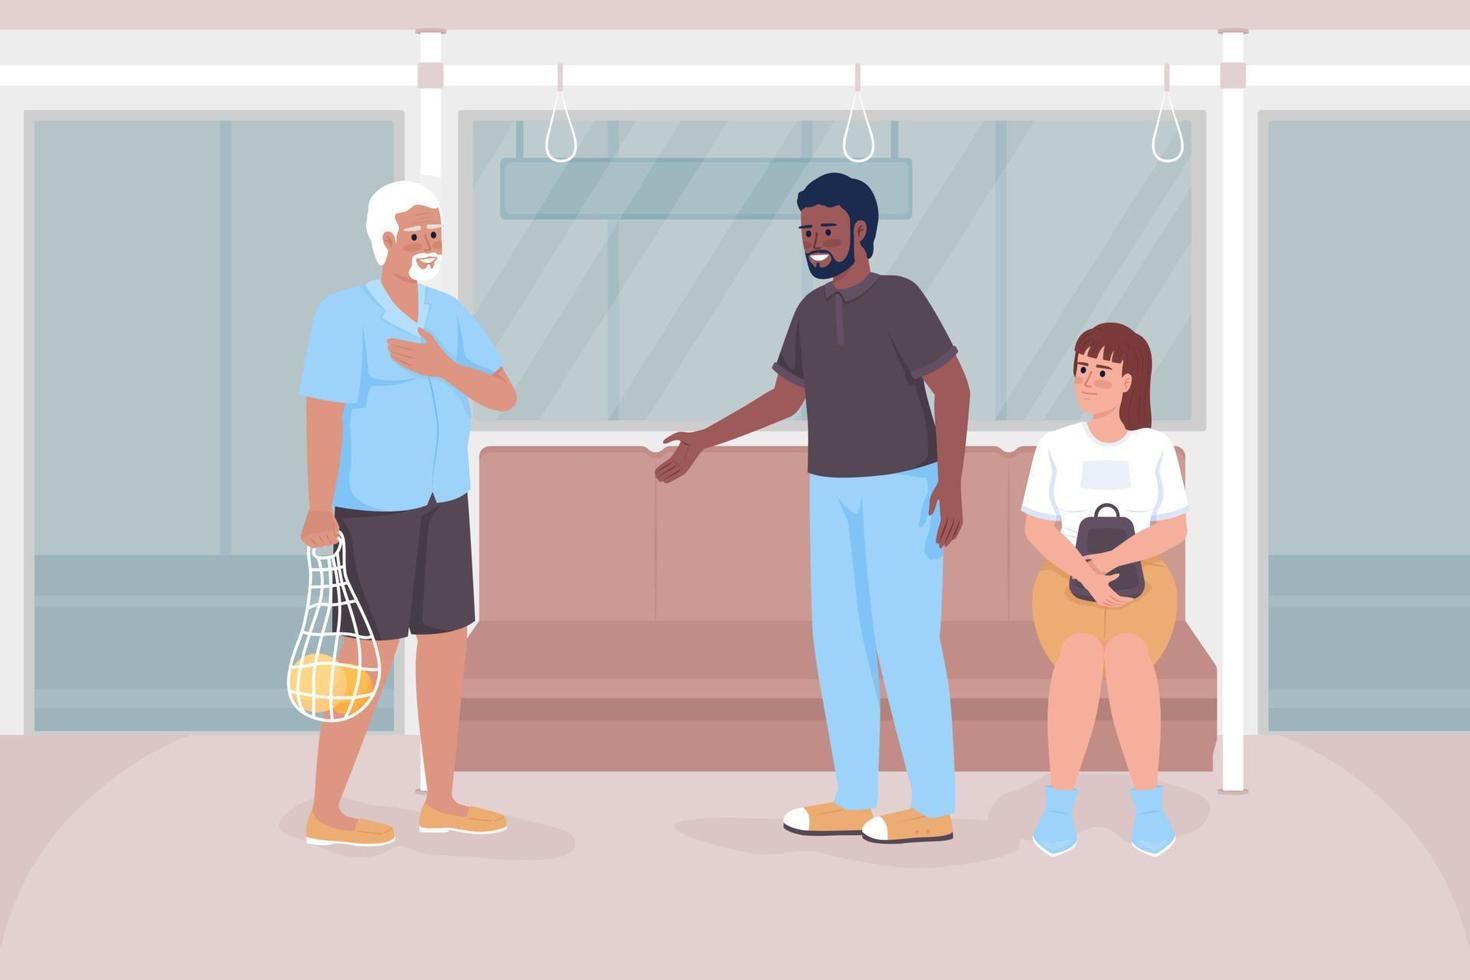 Good manners on public transport flat color vector illustration. Man giving up seat to elderly male citizen. Fully editable 2D simple cartoon characters with train, bus interior on background